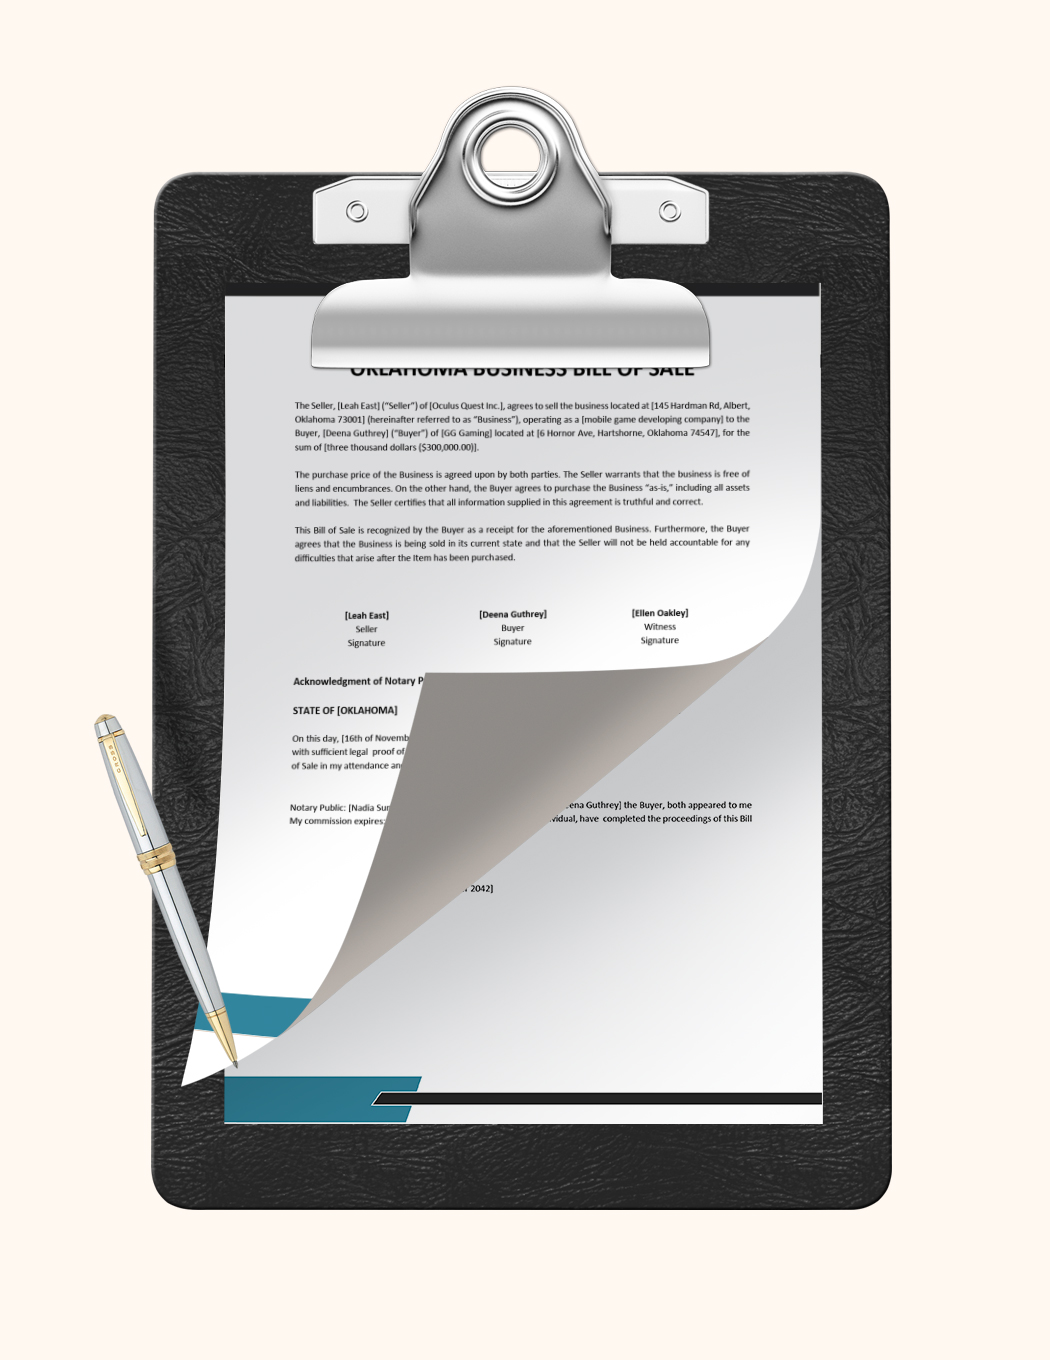 Oklahoma Business Bill of Sale Template